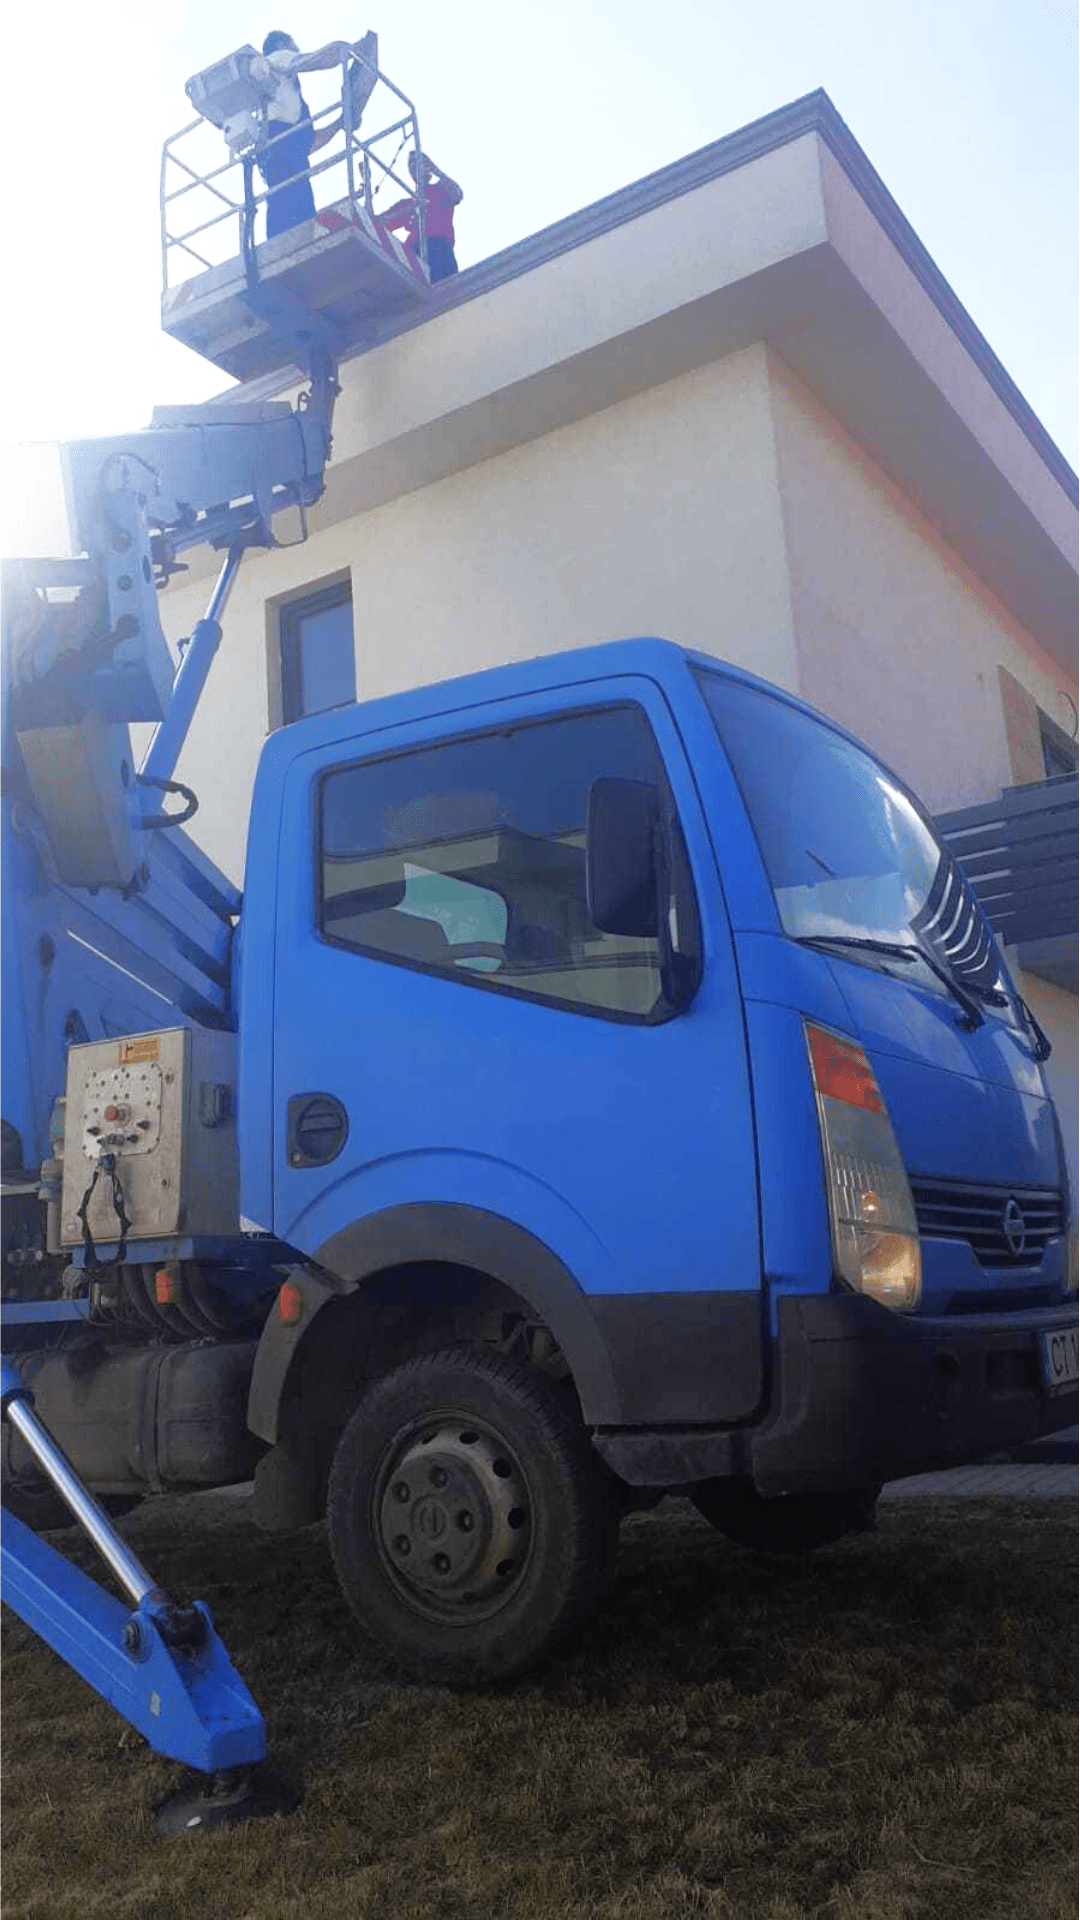 Solar Panel Mounting on a Building Roof with a Truck-Mounted Boom Lift